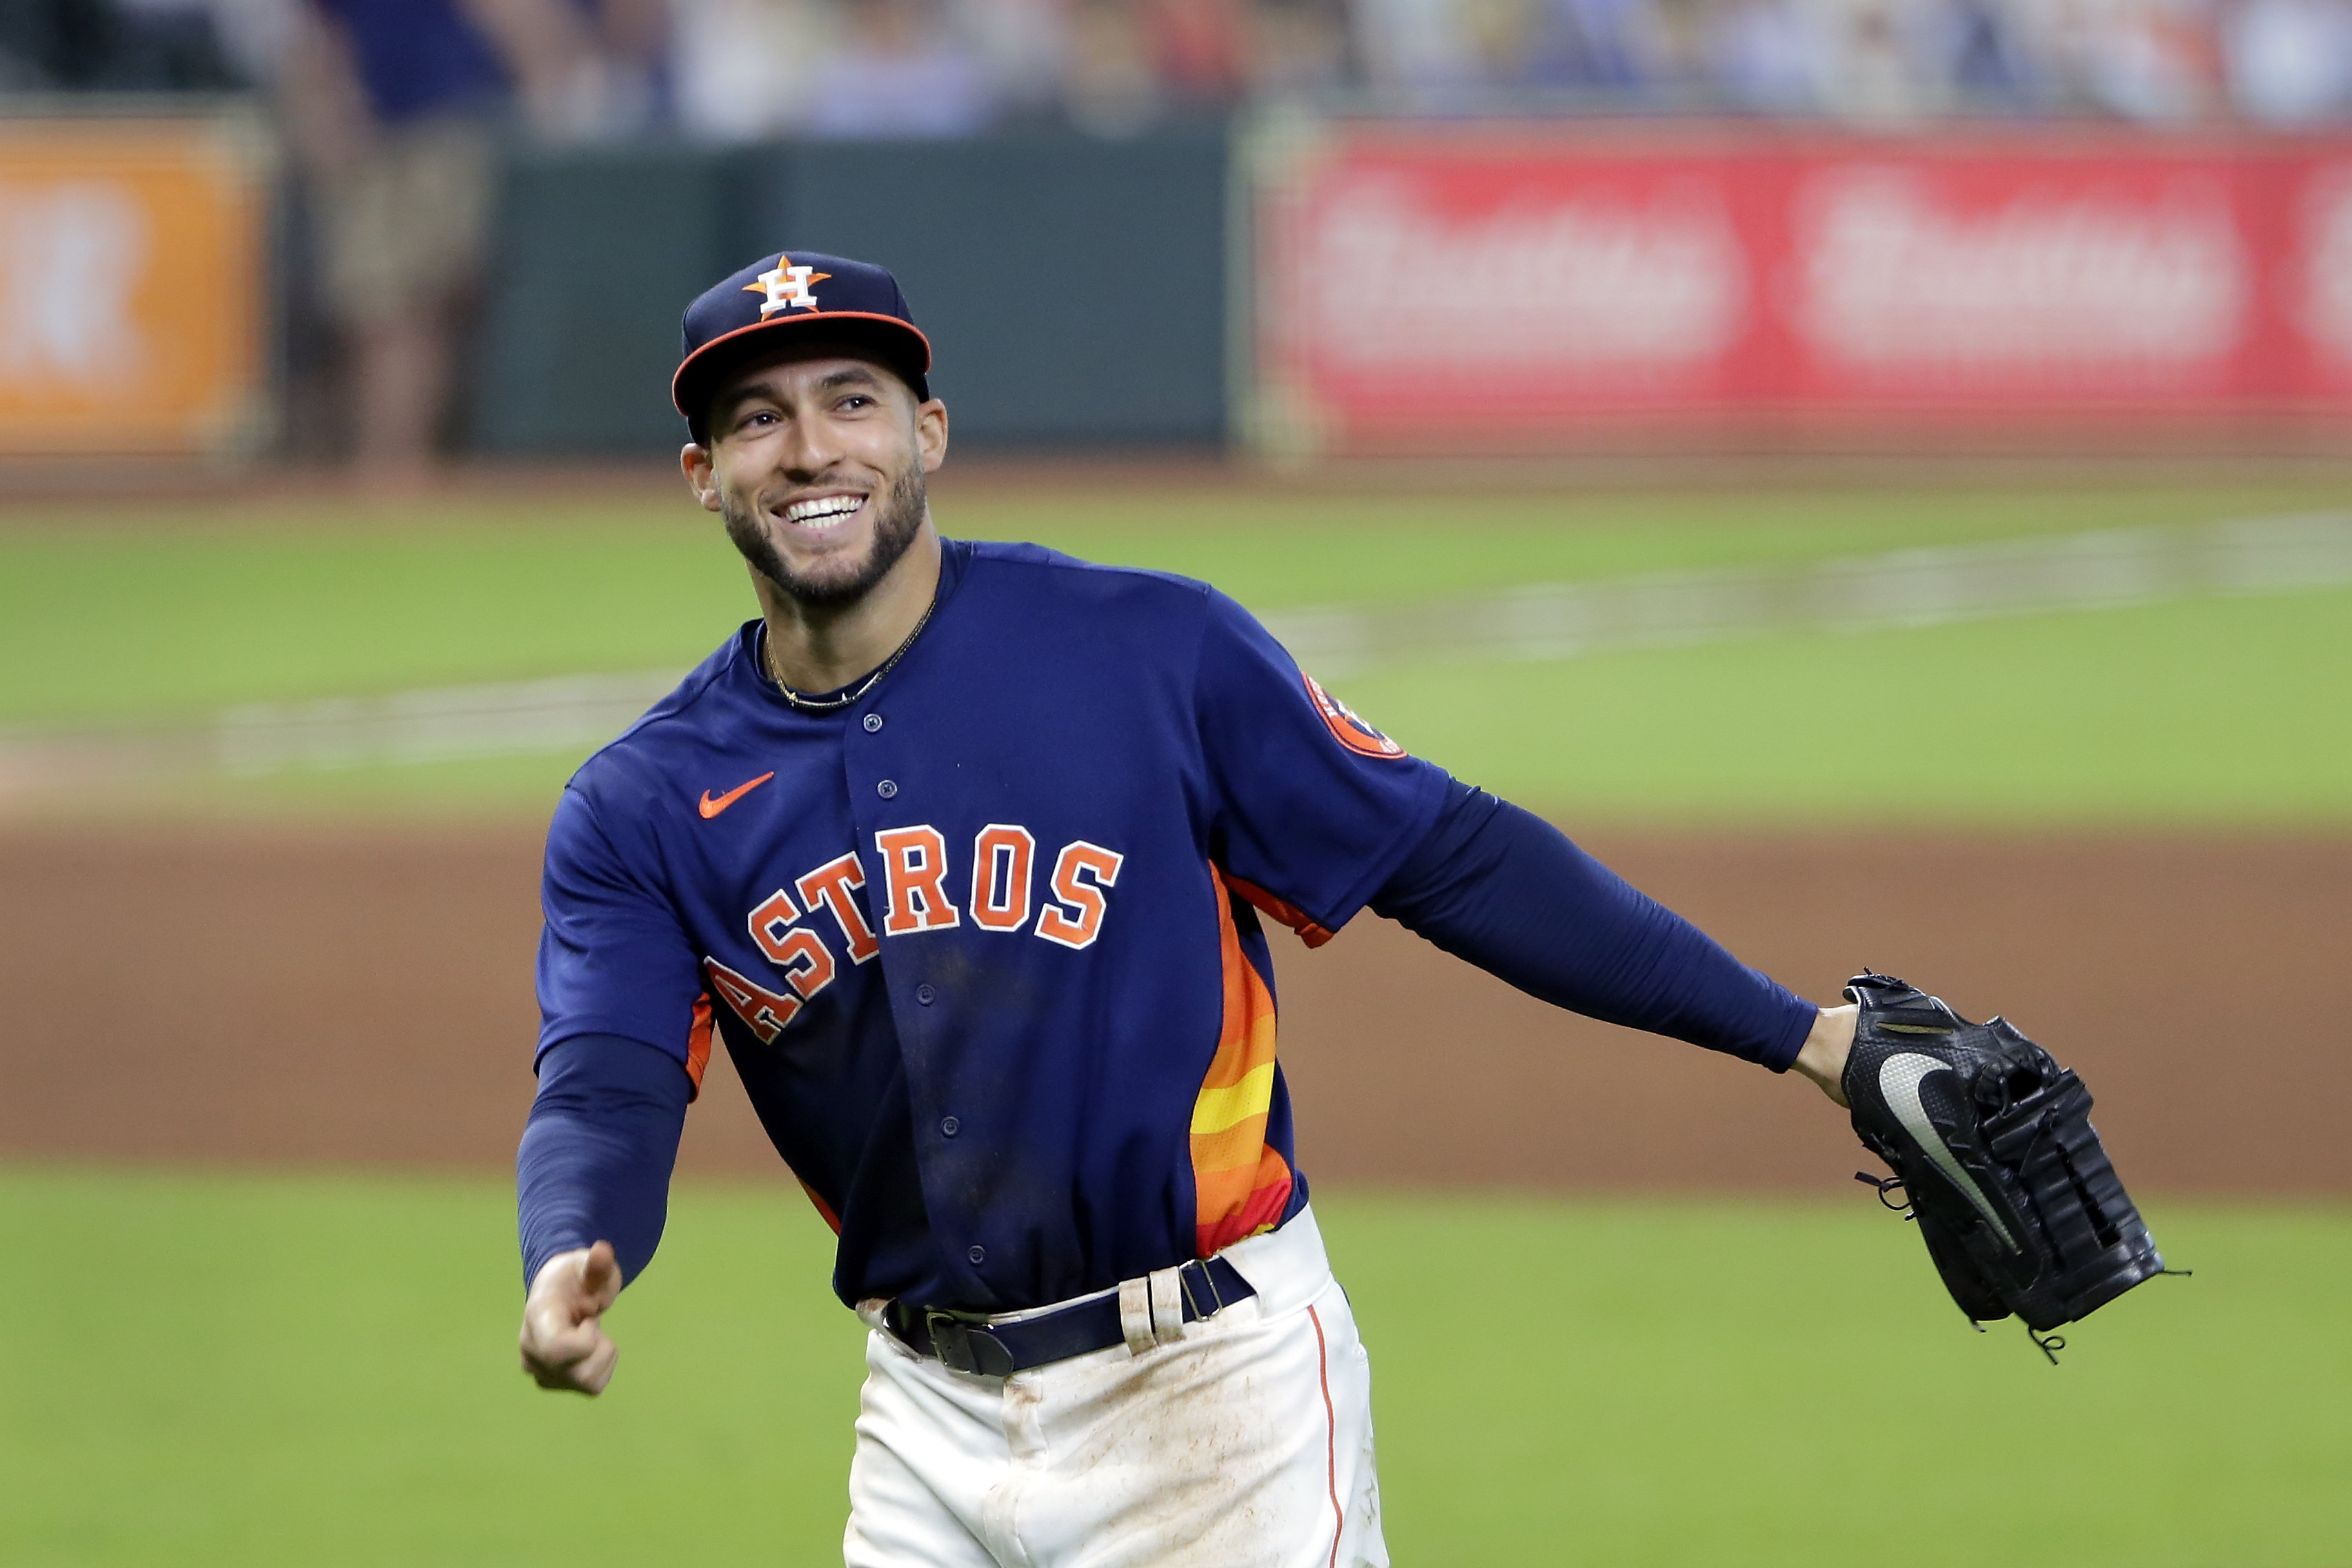 George Springer of the Houston Astros poses for a portrait during